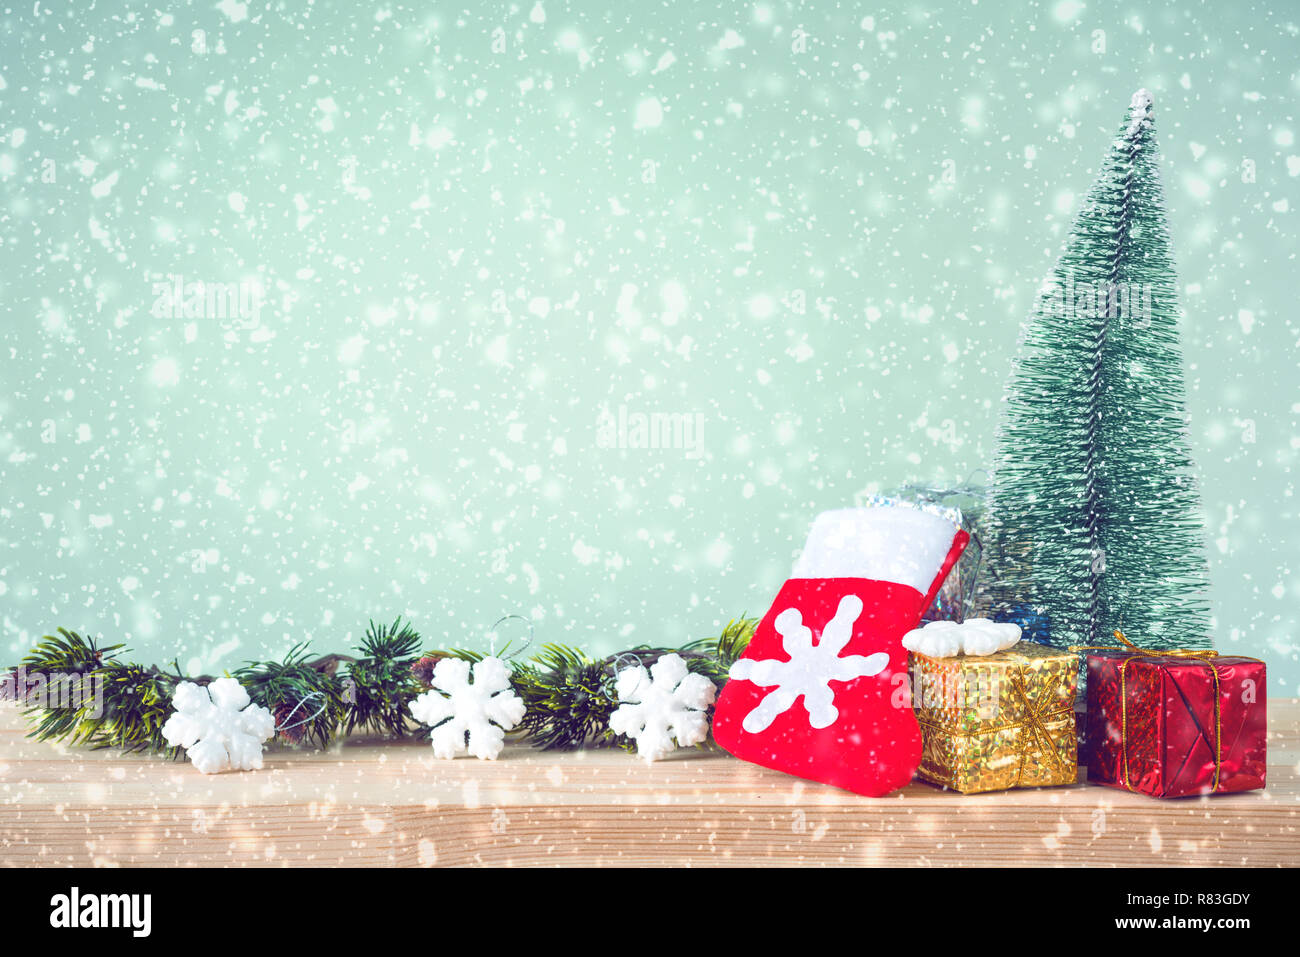 Christmas tree and decorations in snowy weather Stock Photo